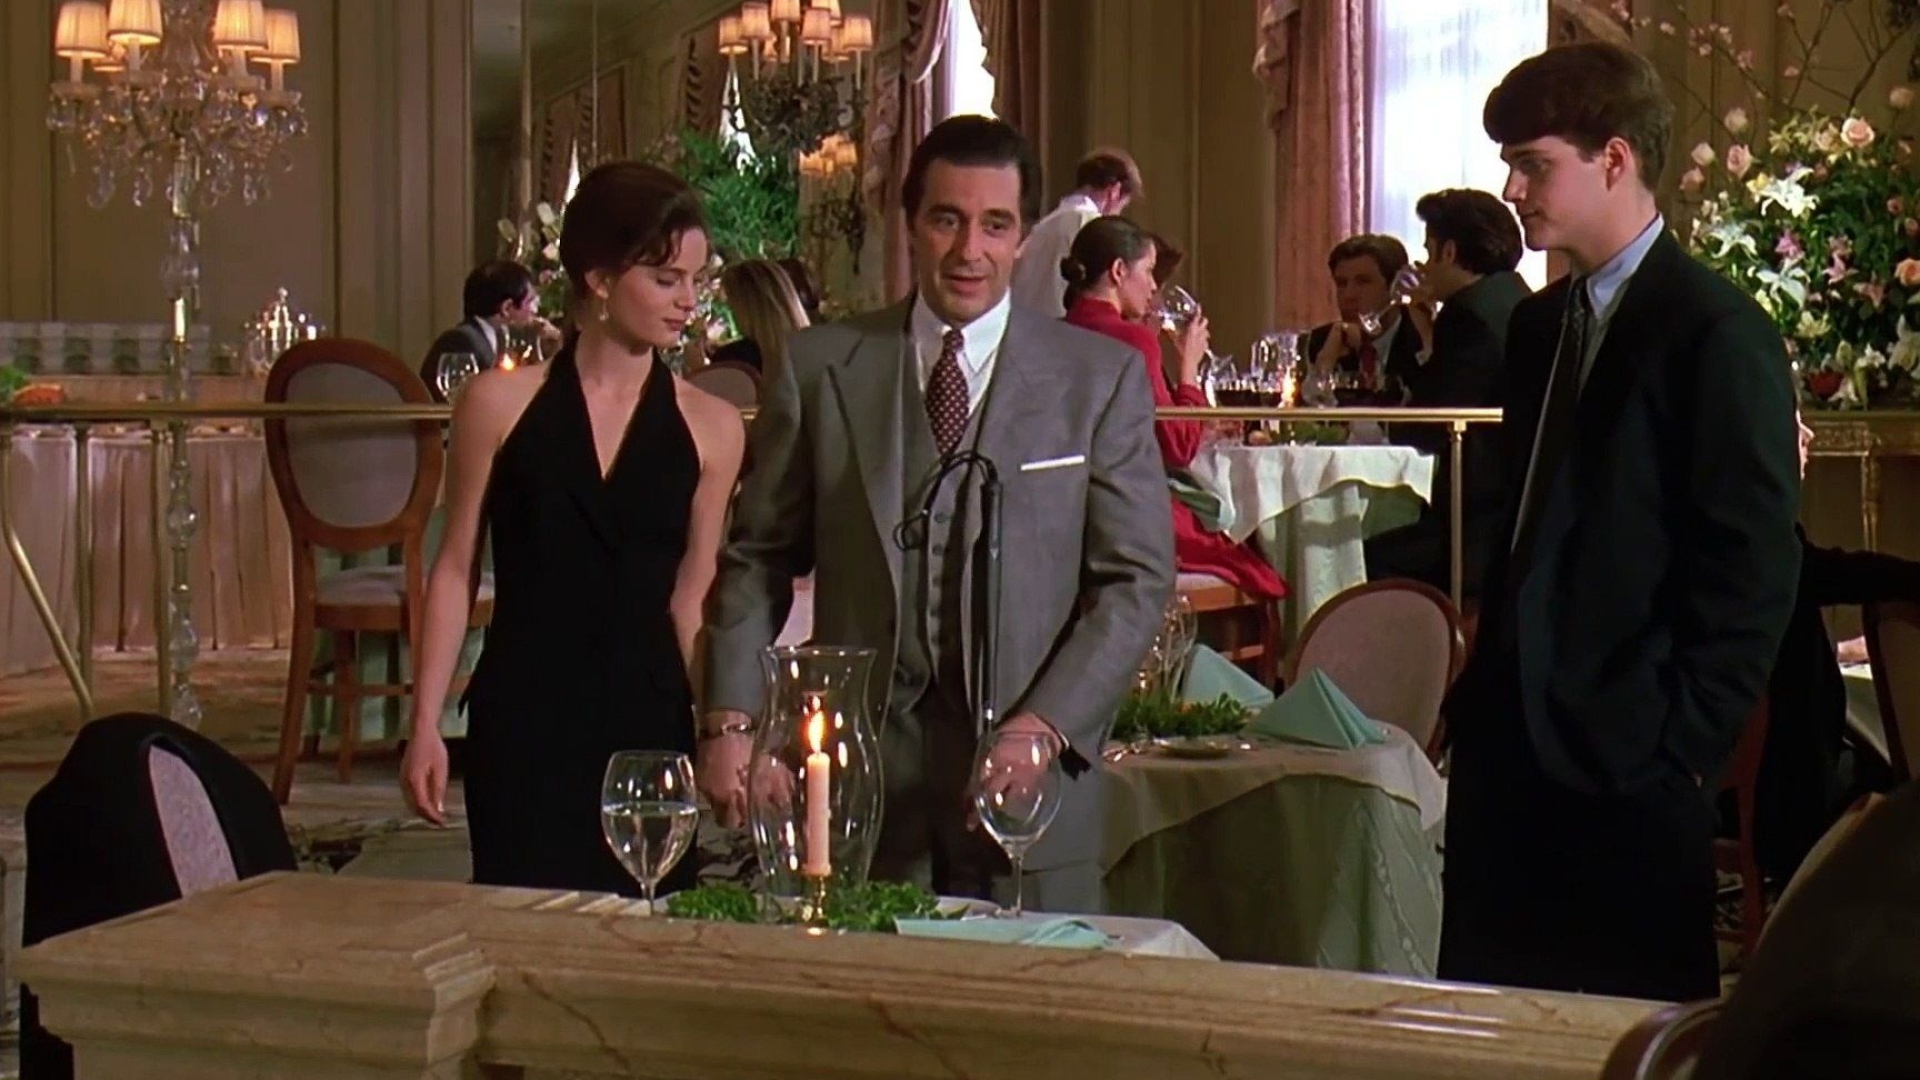 Scent of a Woman: Frank Slade, Charlie Simms, Donna, Screenplay by Bo Goldman. 1920x1080 Full HD Background.